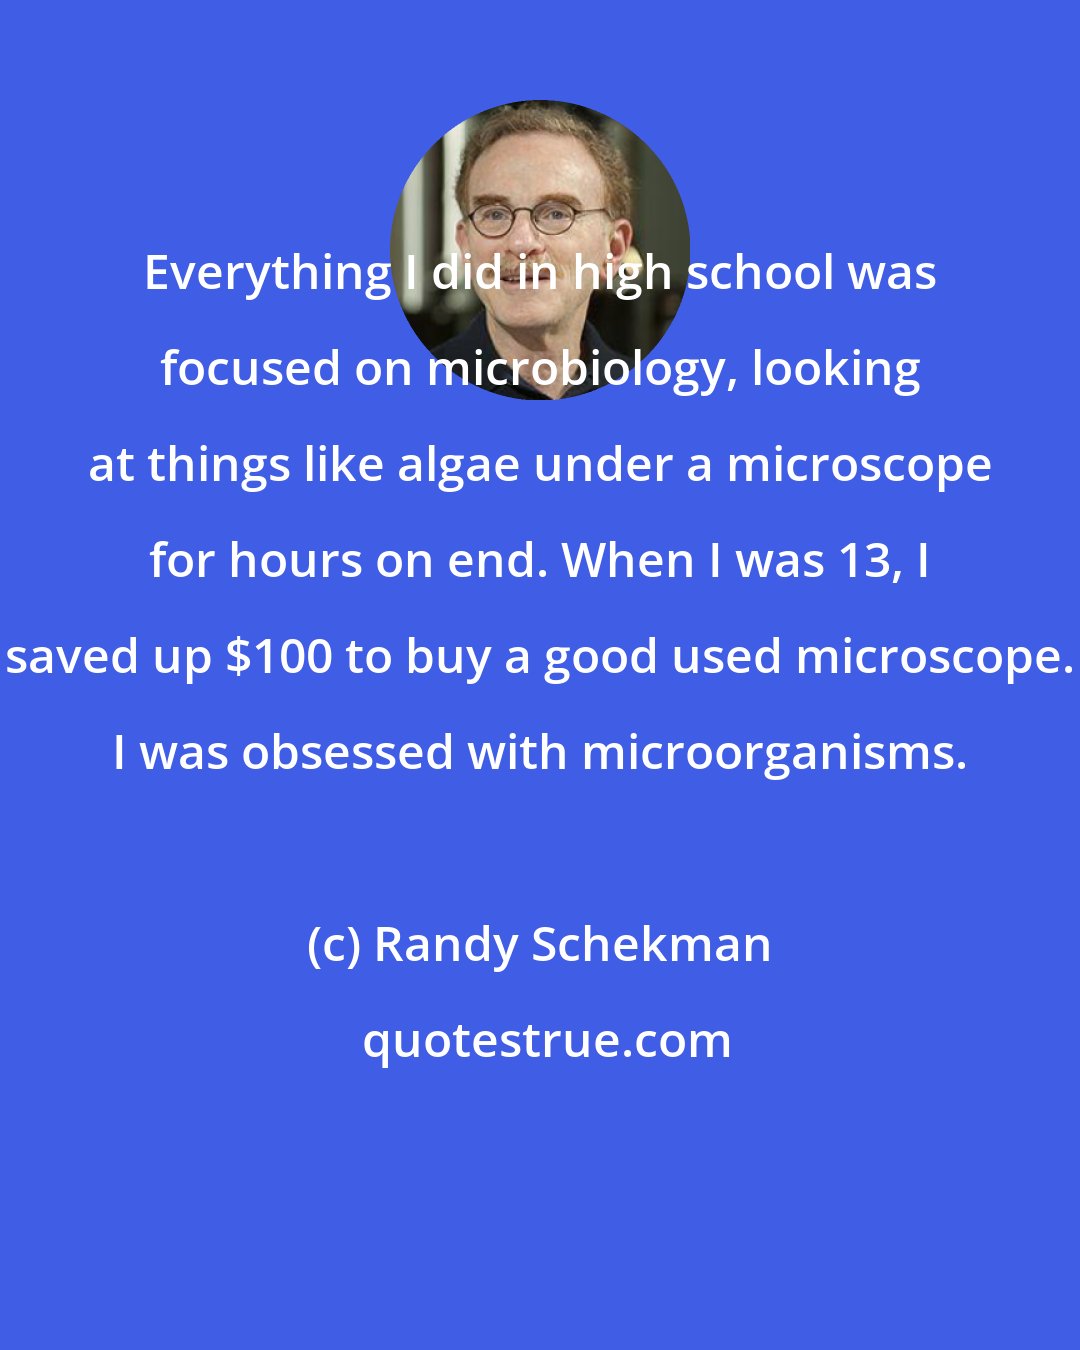 Randy Schekman: Everything I did in high school was focused on microbiology, looking at things like algae under a microscope for hours on end. When I was 13, I saved up $100 to buy a good used microscope. I was obsessed with microorganisms.